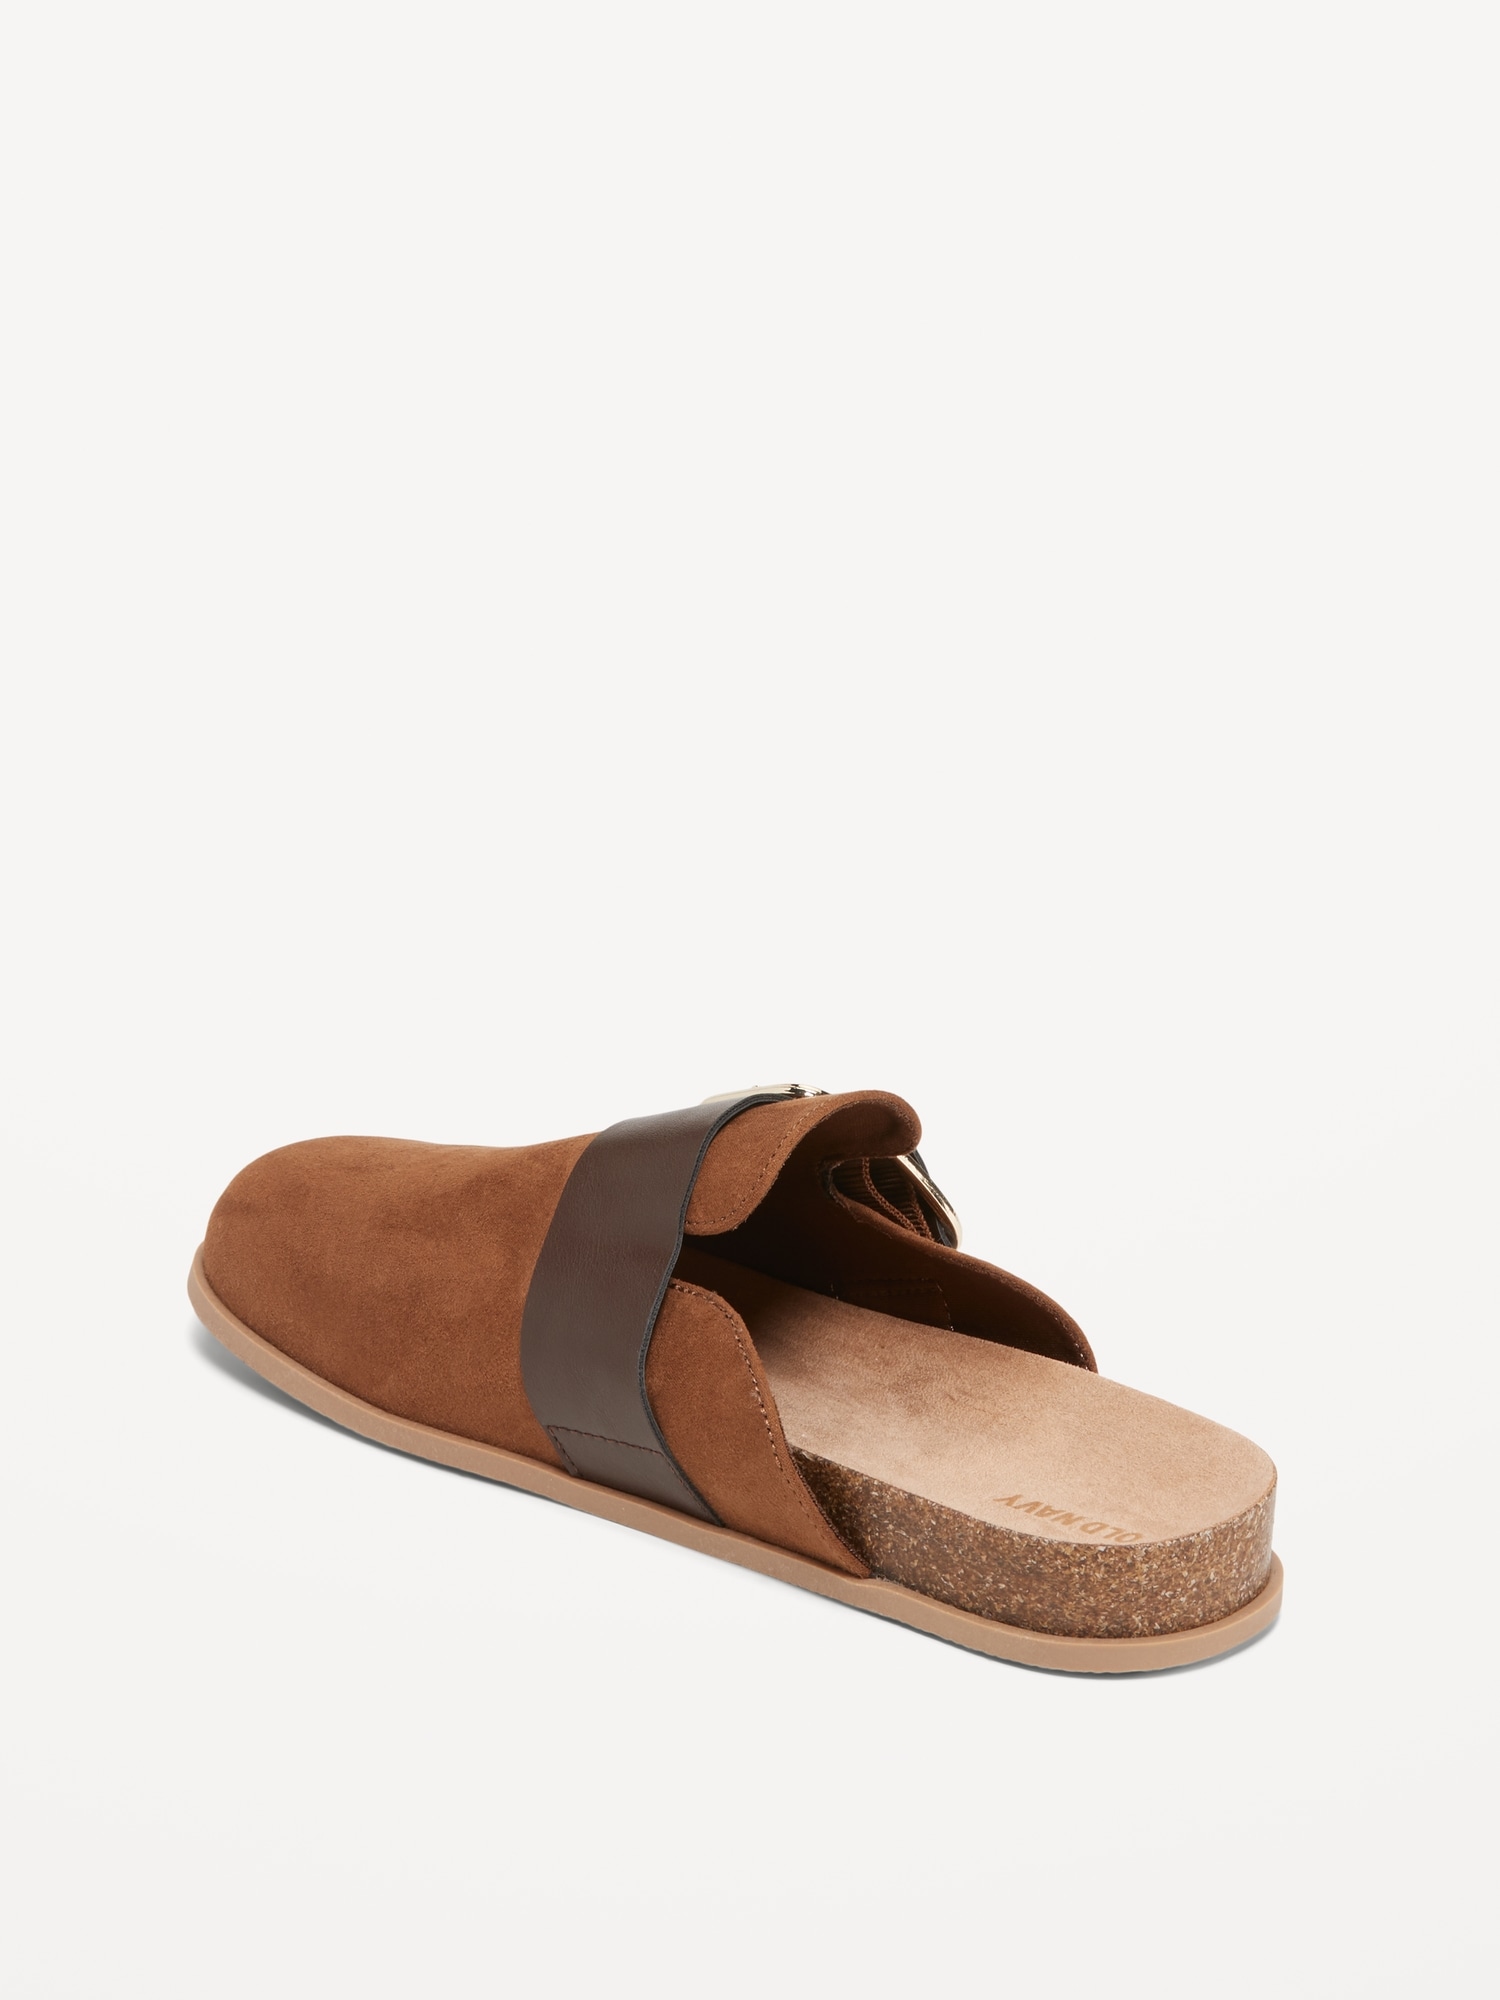 Faux Suede Clog Shoes for Women | Old Navy